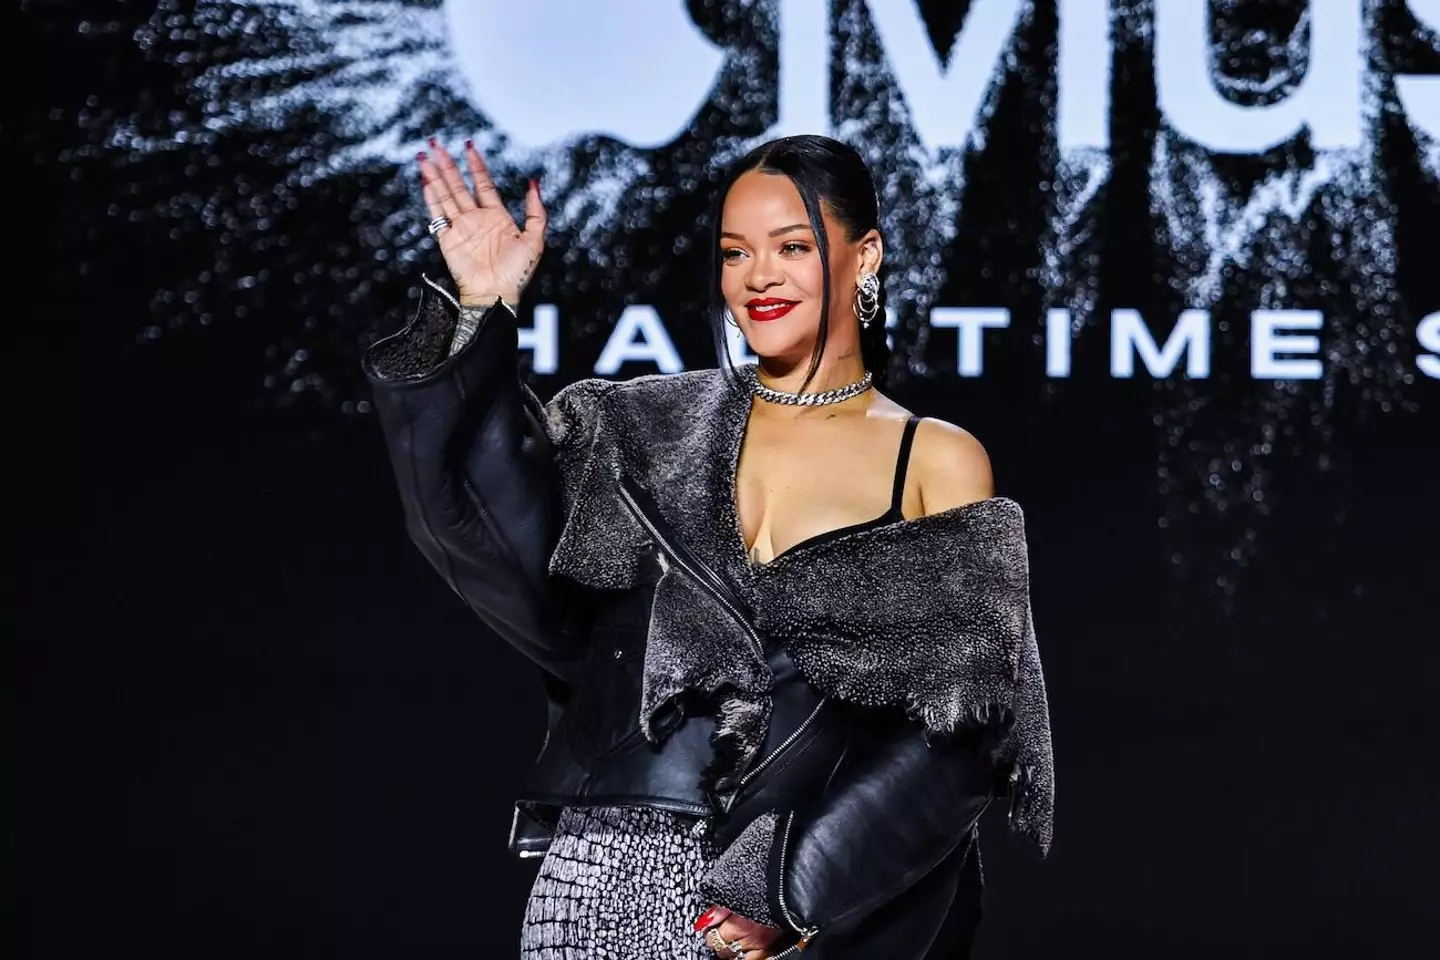 Rihanna is set to perform at this year's half-time show in Arizona.